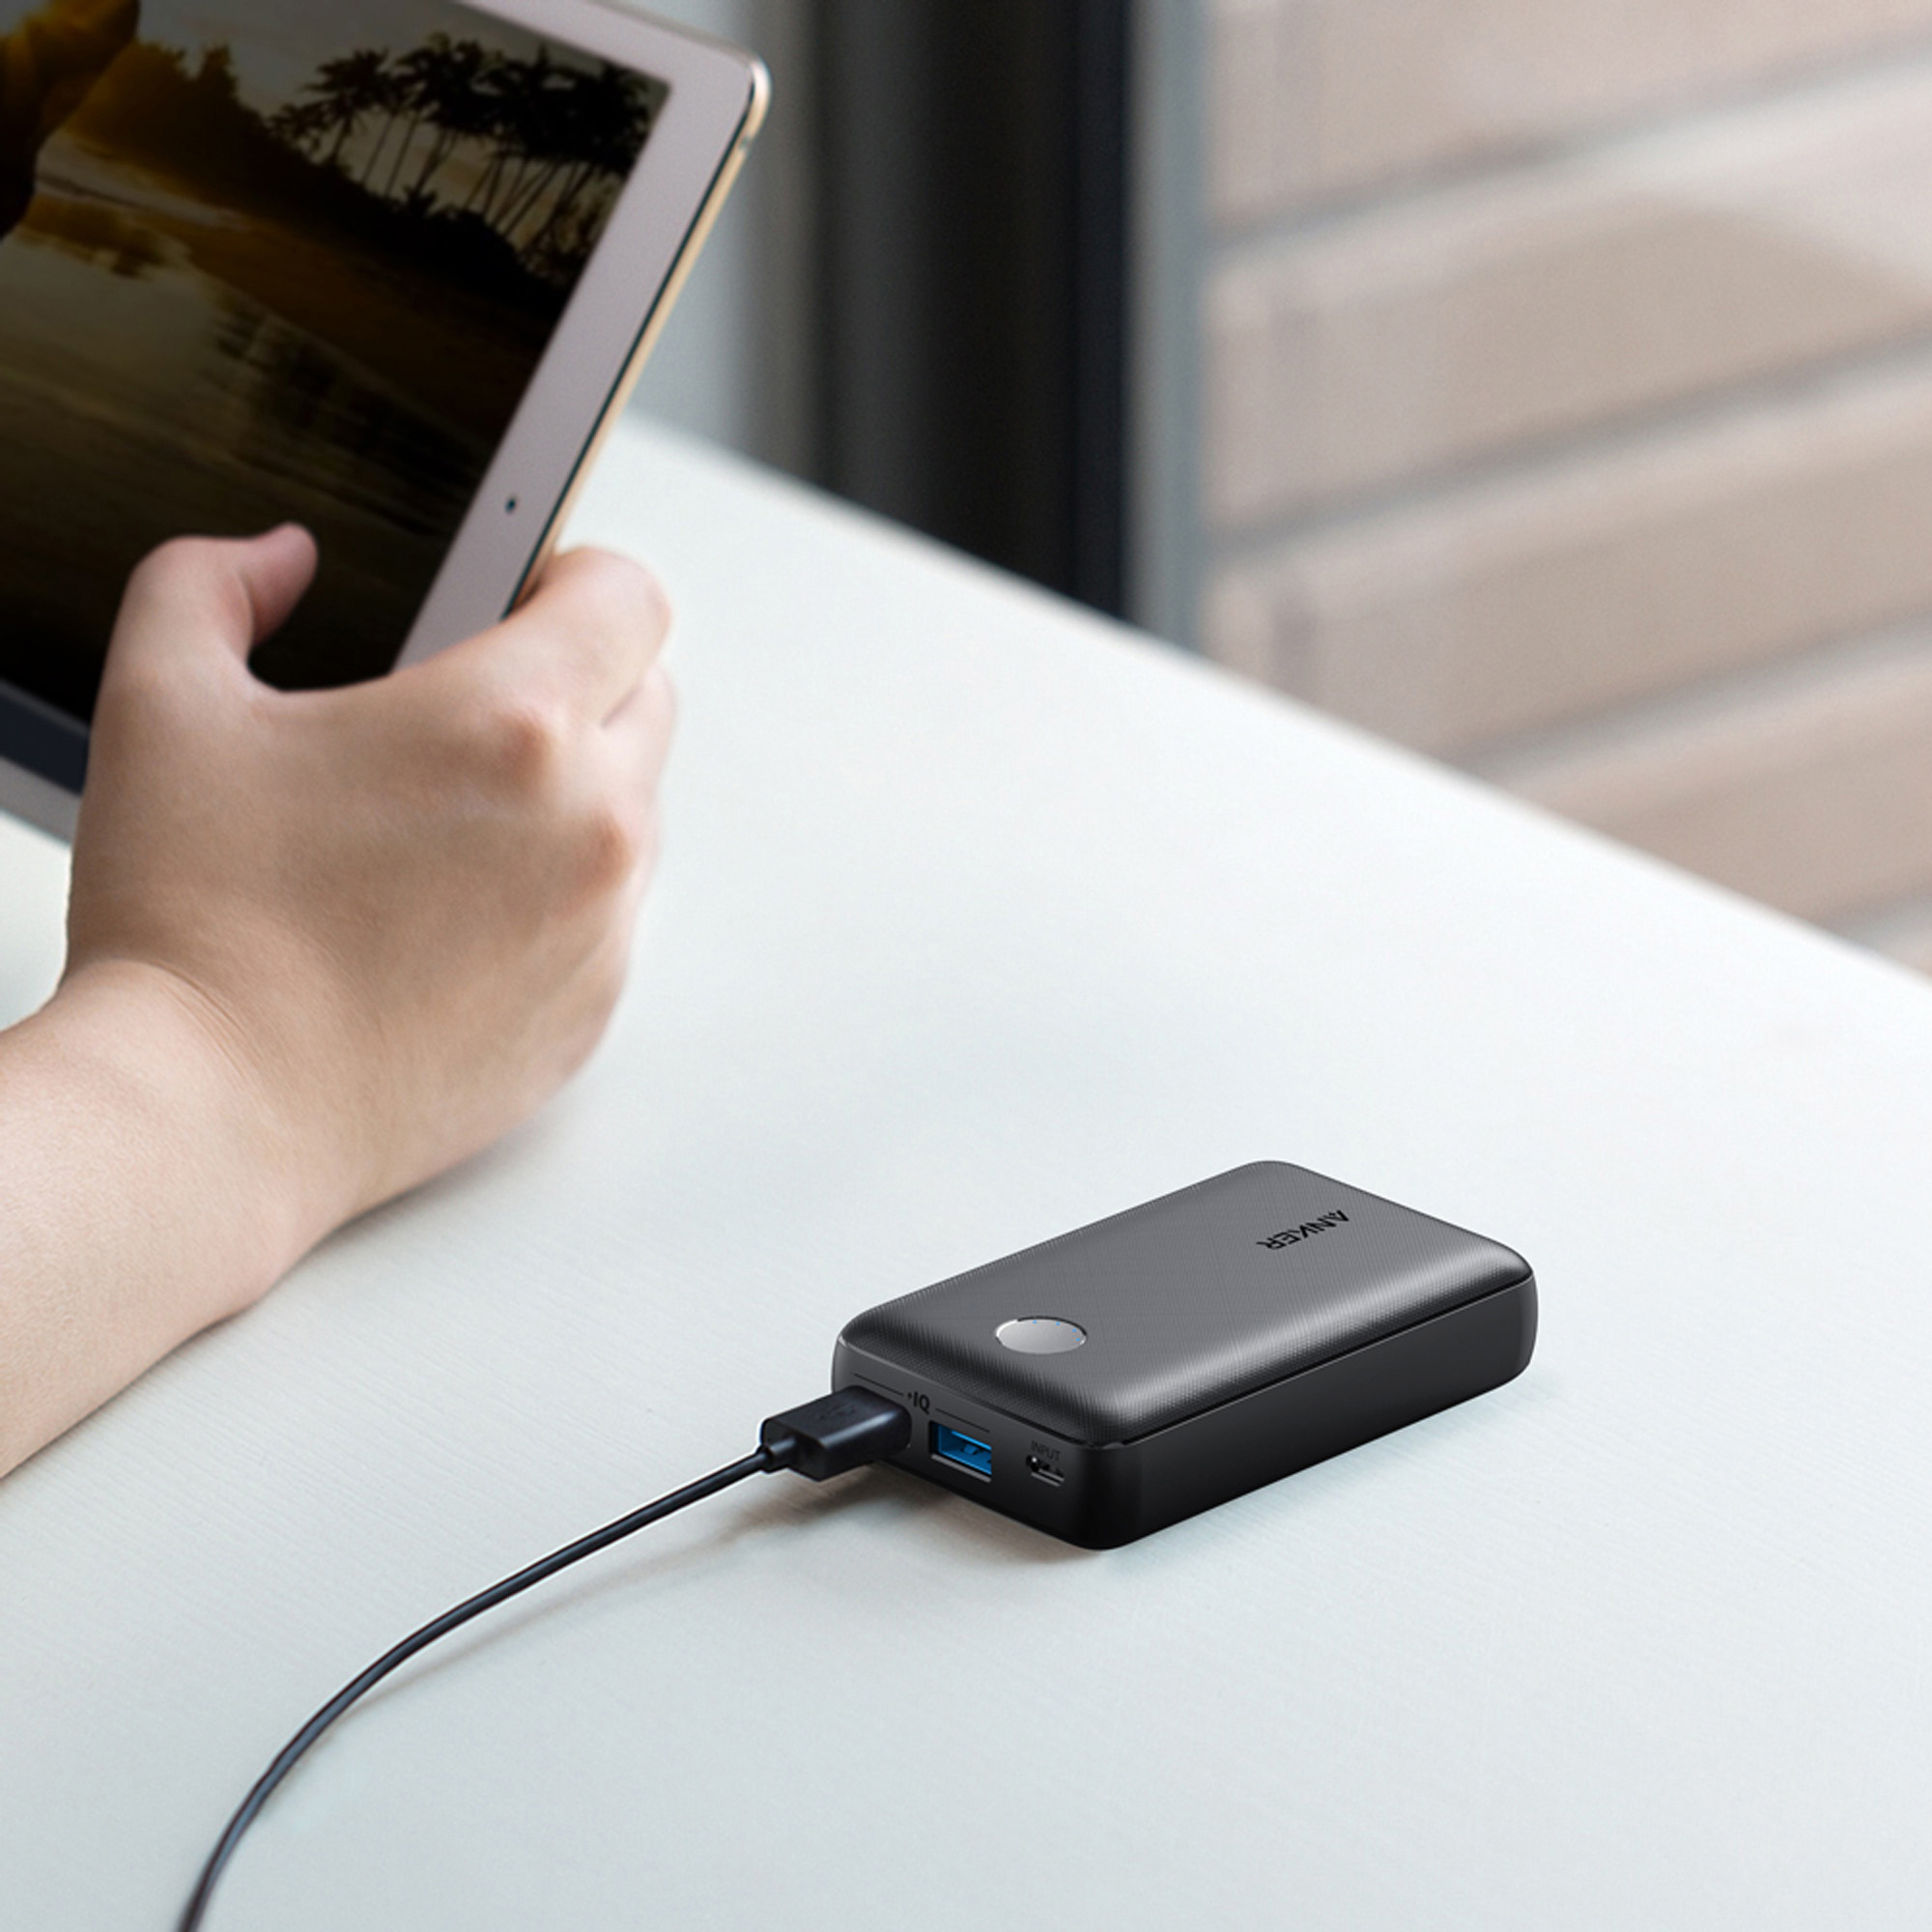 Anker's Ultra-Compact Phone Charger - Black